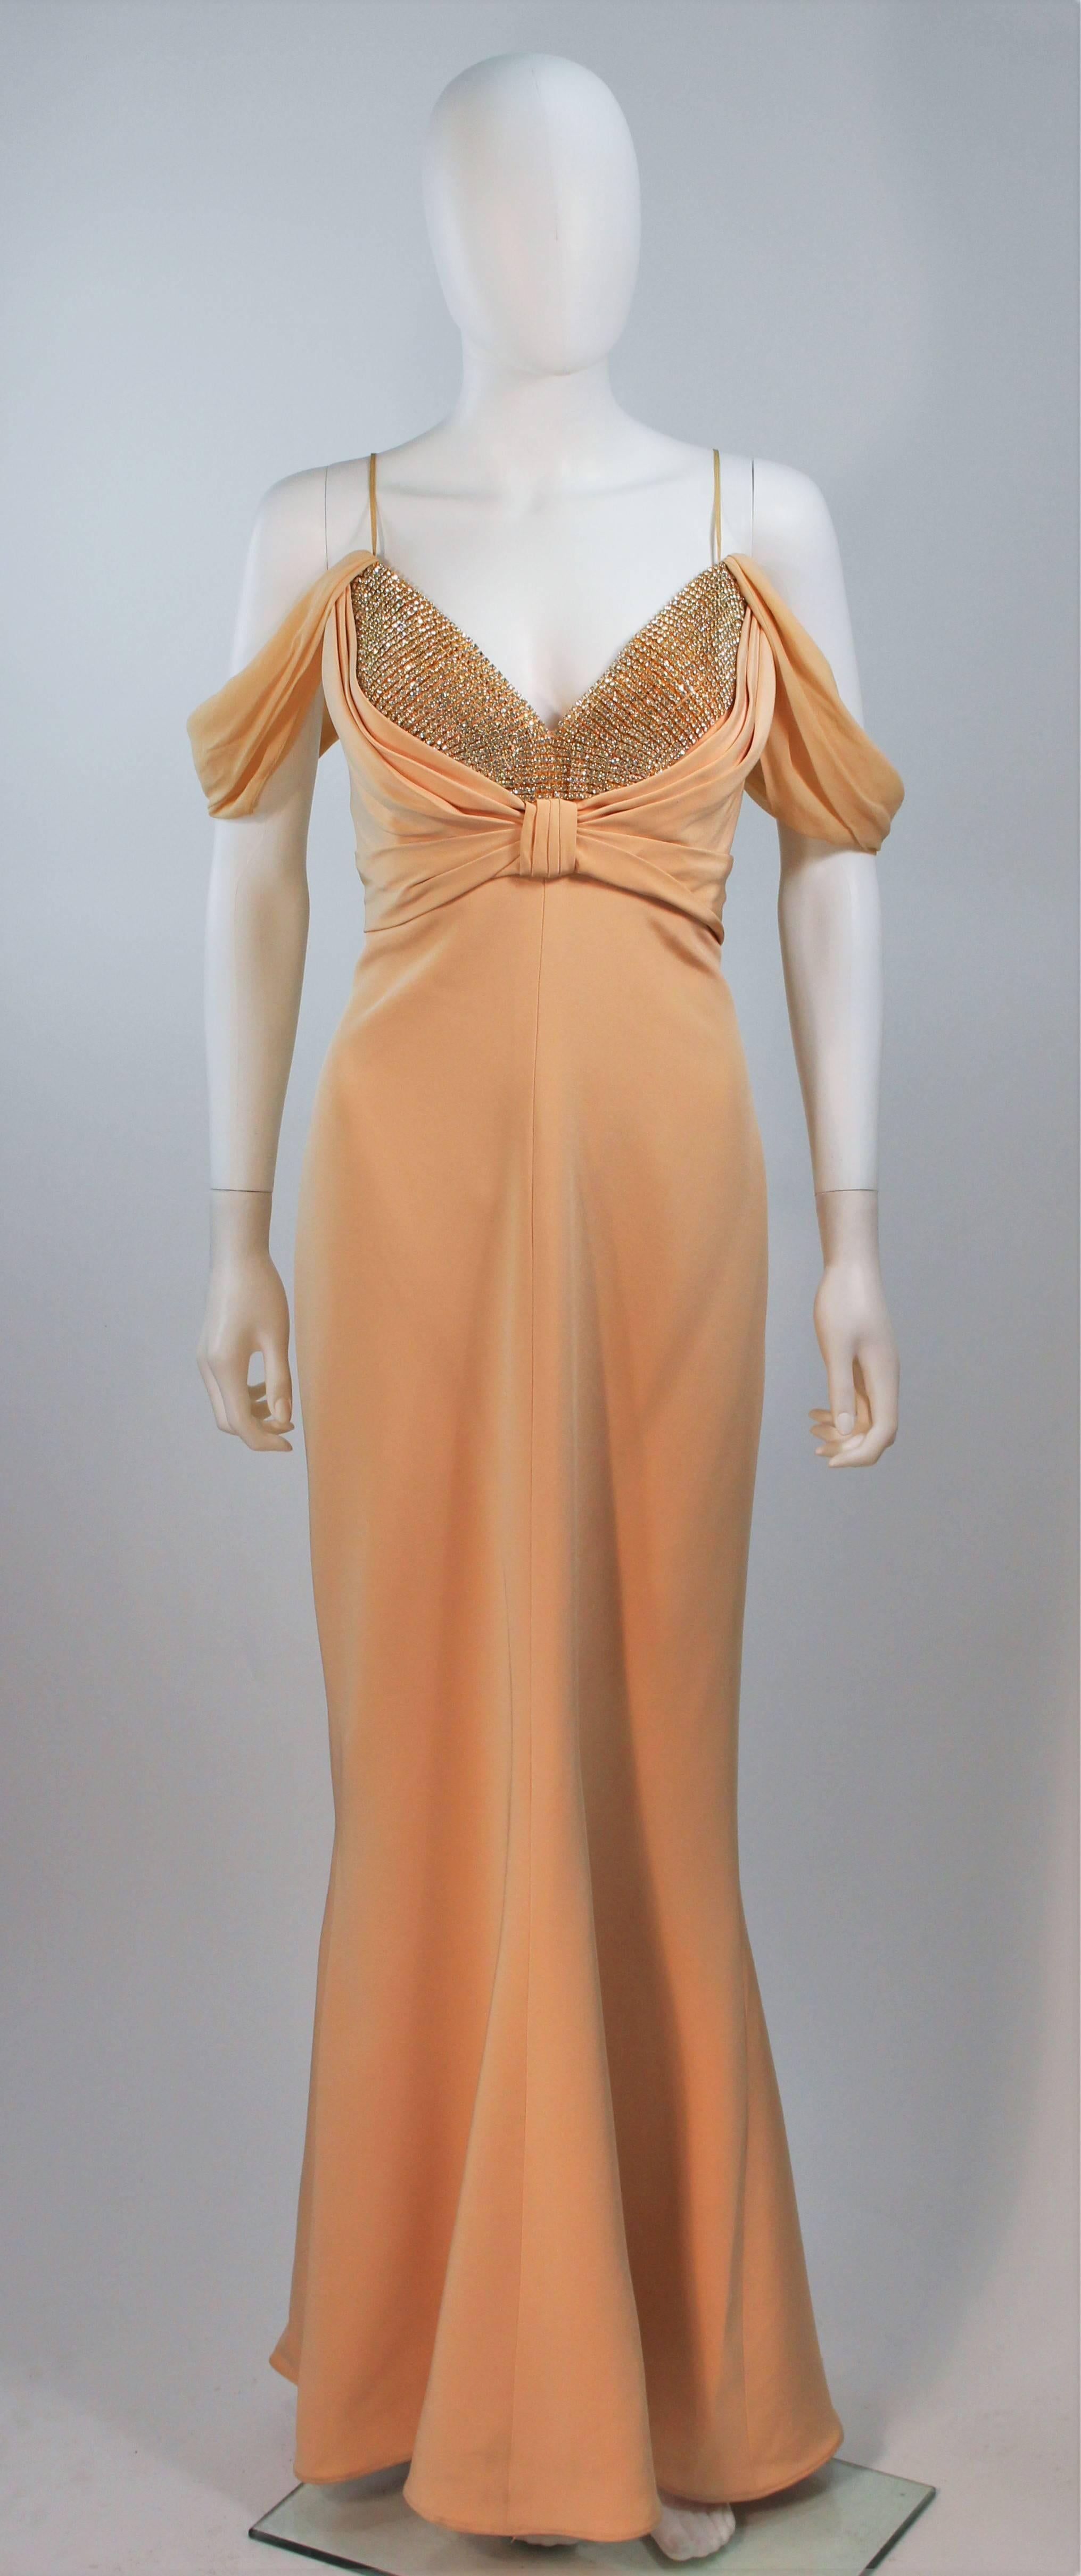  This Sam Carlin  gown is composed of a nude silk fabric with embellished bust and chiffon draped sleeve detail. This garment is boned, features a center back zipper. This stunning gown is in excellent vintage condition with original tags. 

 